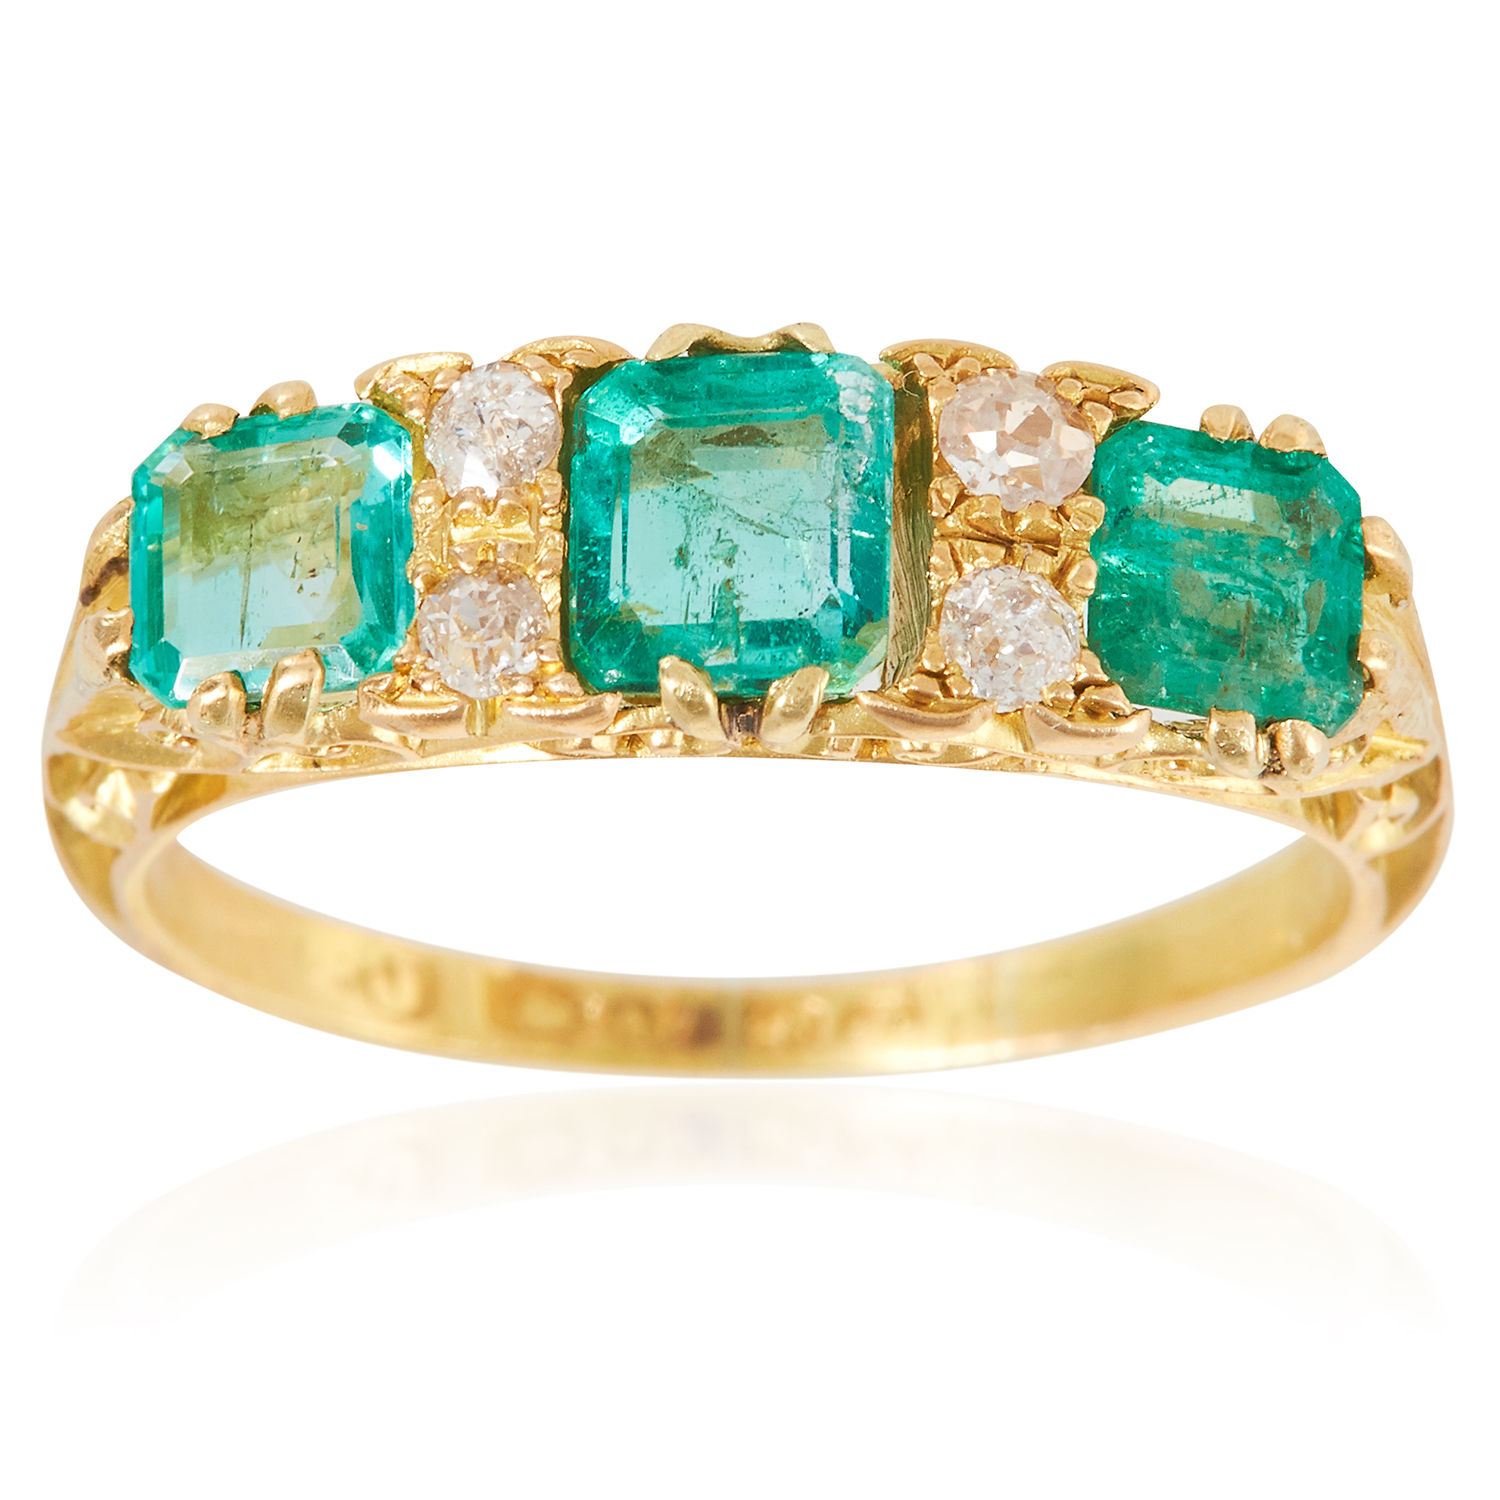 AN ANTIQUE EMERALD AND DIAMOND RING in 18ct yellow gold, the three step cut emeralds punctuated by